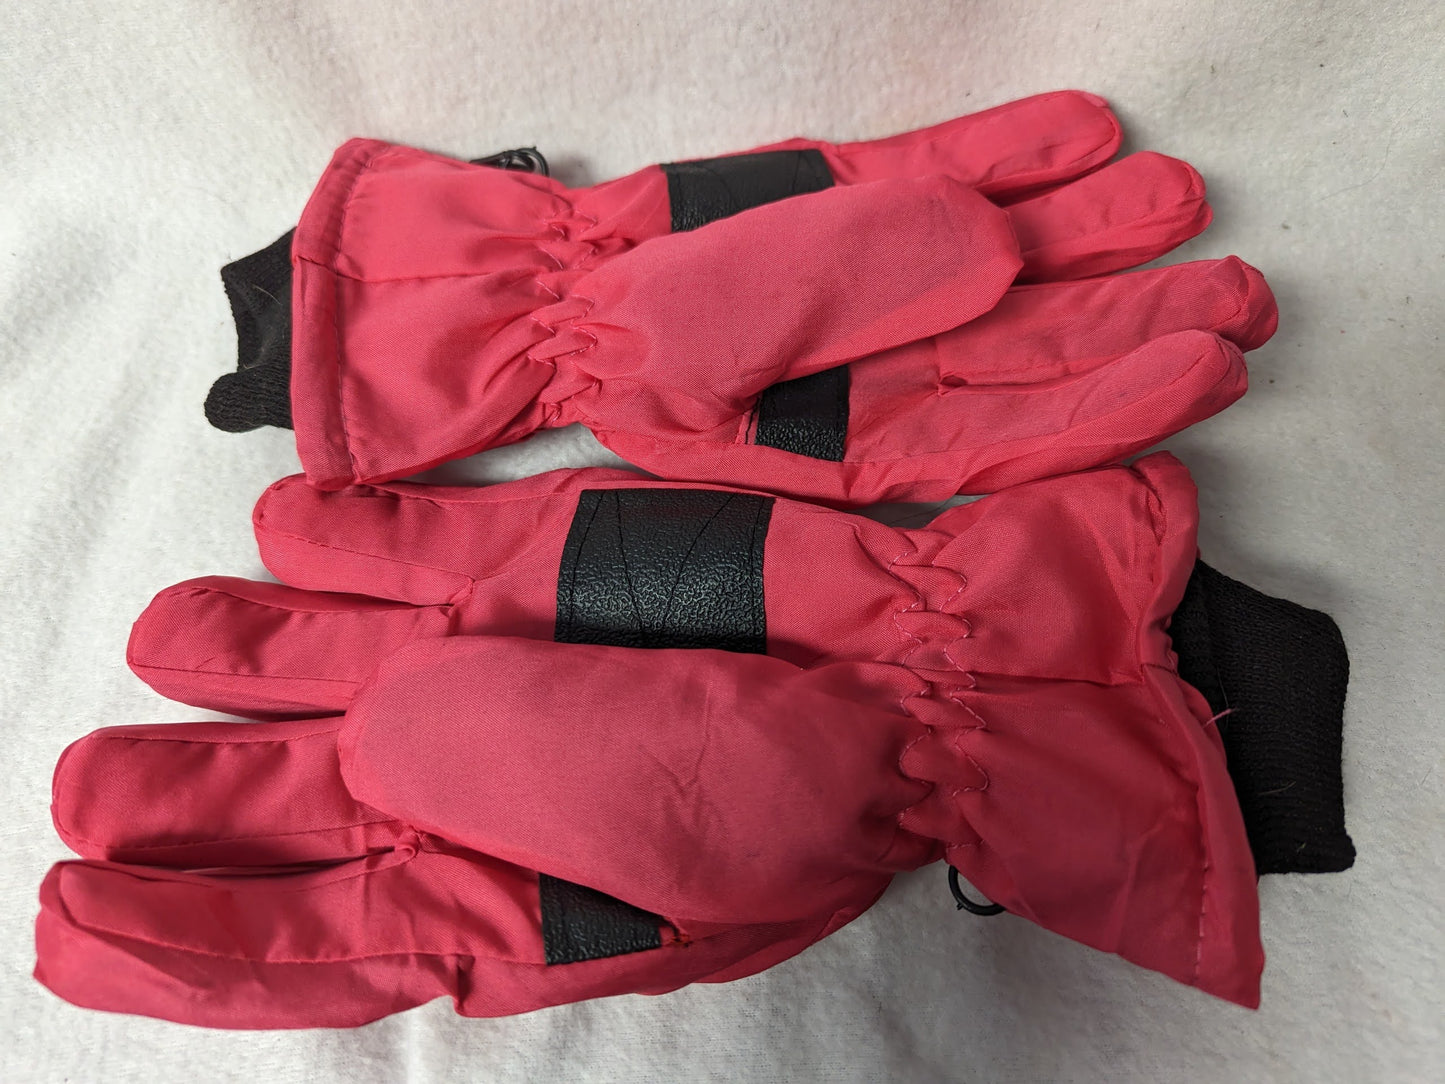 Women's Insulated Winter Gloves Size Women Large Color Pink Condition Used